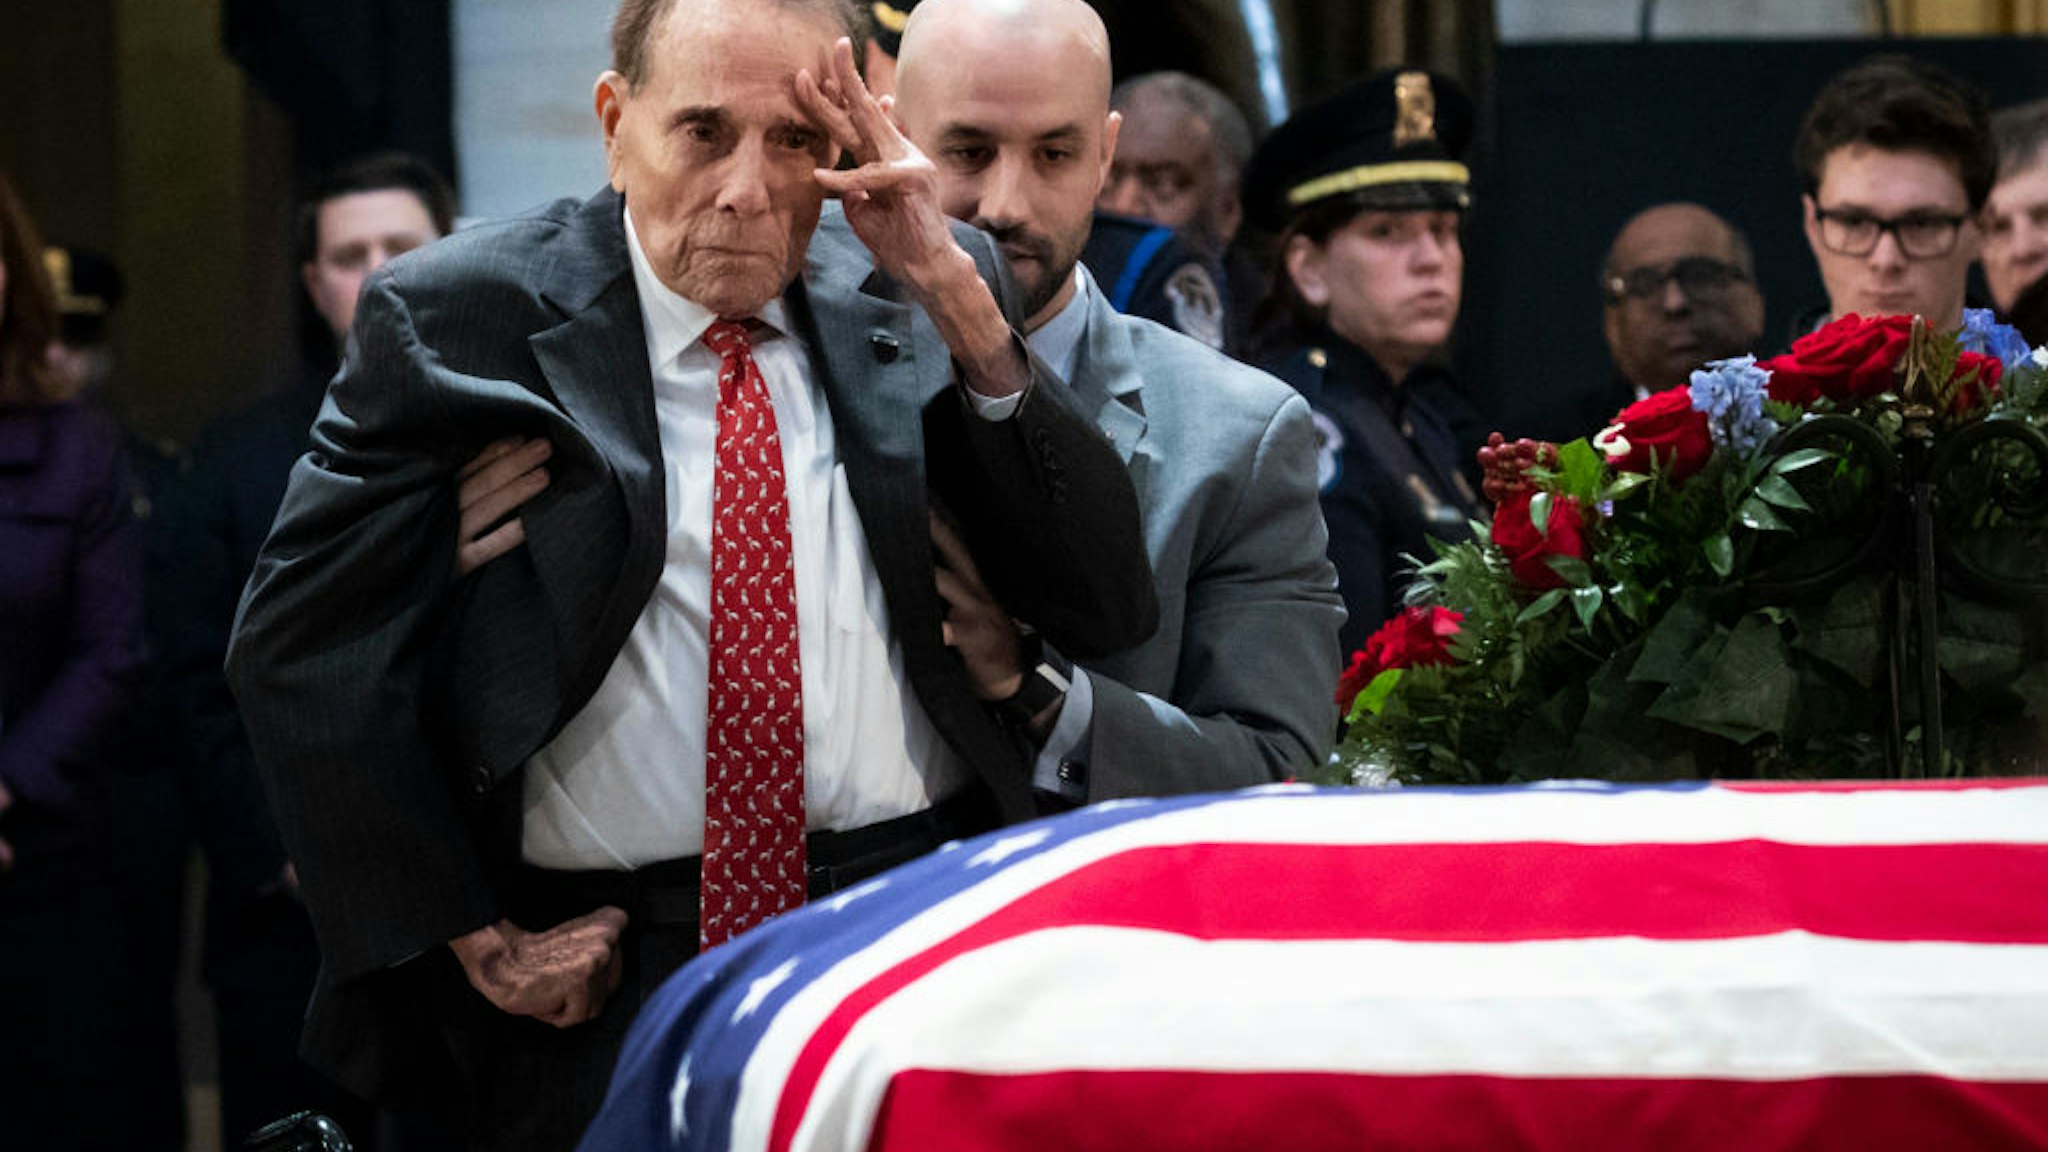 WASHINGTON, DC - DECEMBER 4: Former Senator Bob Dole stands up and salutes the casket of the late former President George H.W. Bush as he lies in state at the U.S. Capitol, December 4, 2018 in Washington, DC. A WWII combat veteran, Bush served as a member of Congress from Texas, ambassador to the United Nations, director of the CIA, vice president and 41st president of the United States. Bush will lie in state in the U.S. Capitol Rotunda until Wednesday morning. (Photo by Drew Angerer/Getty Images)